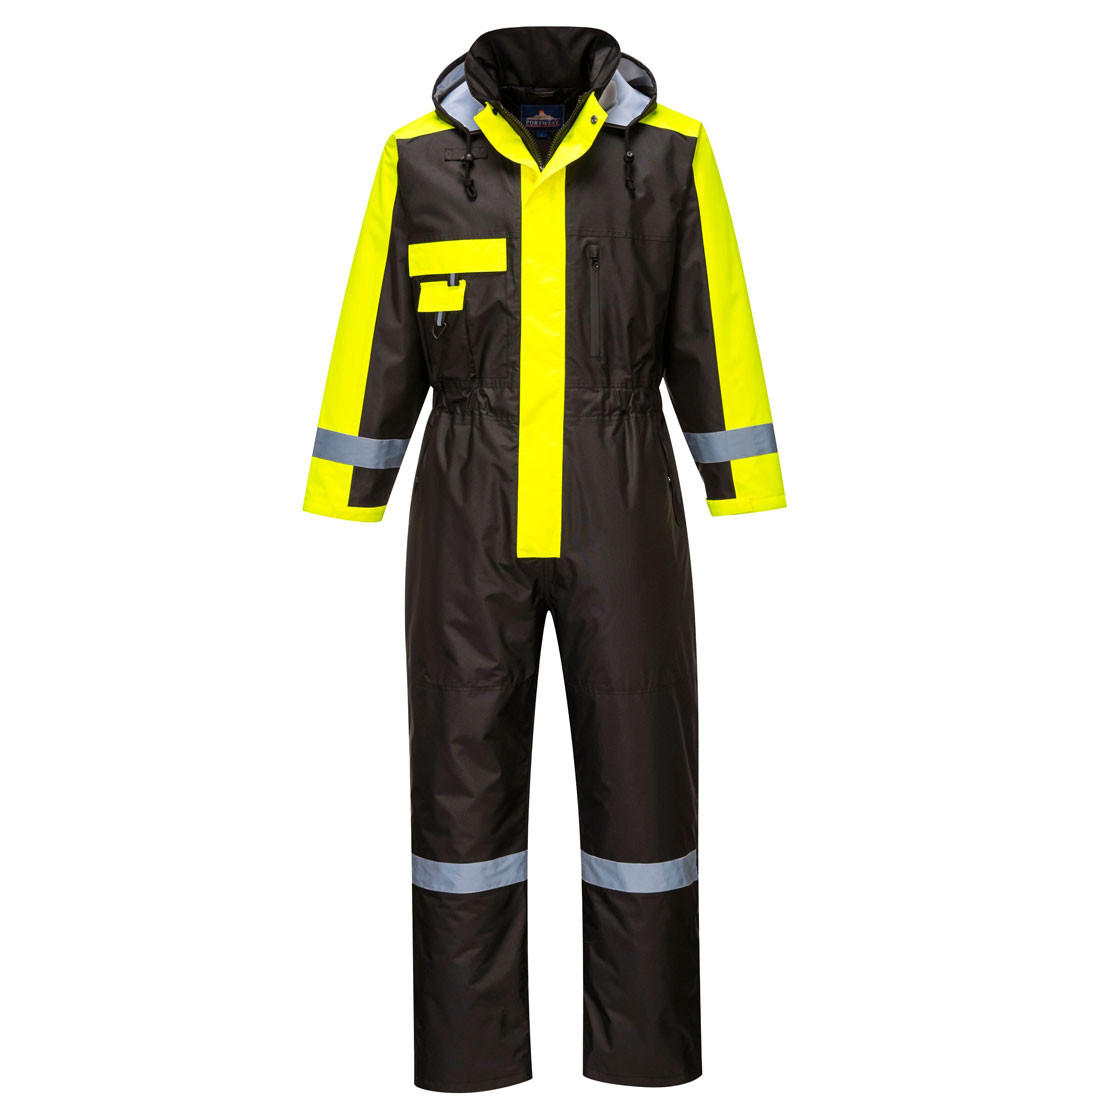 Winter Coverall - Safetywear